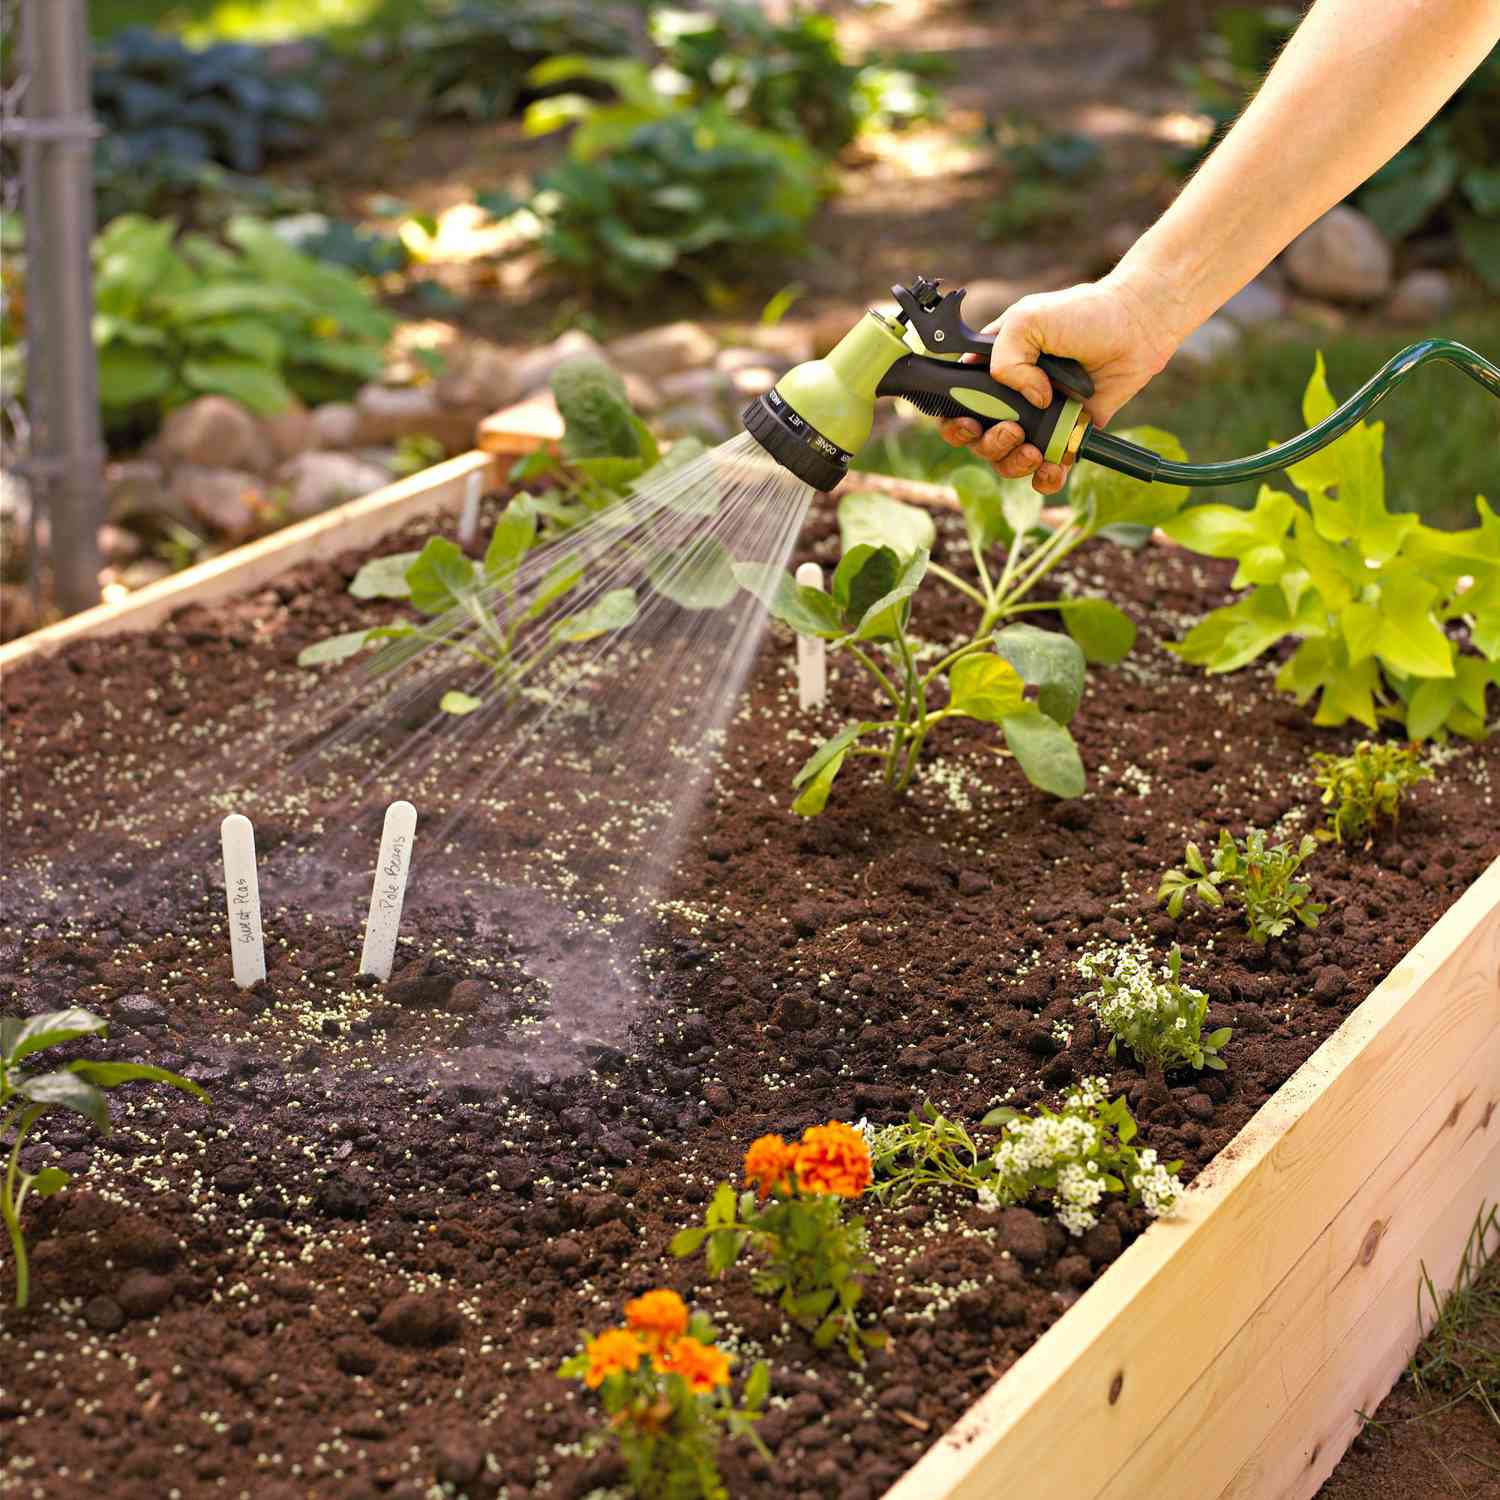 Watering a raised-bed garden